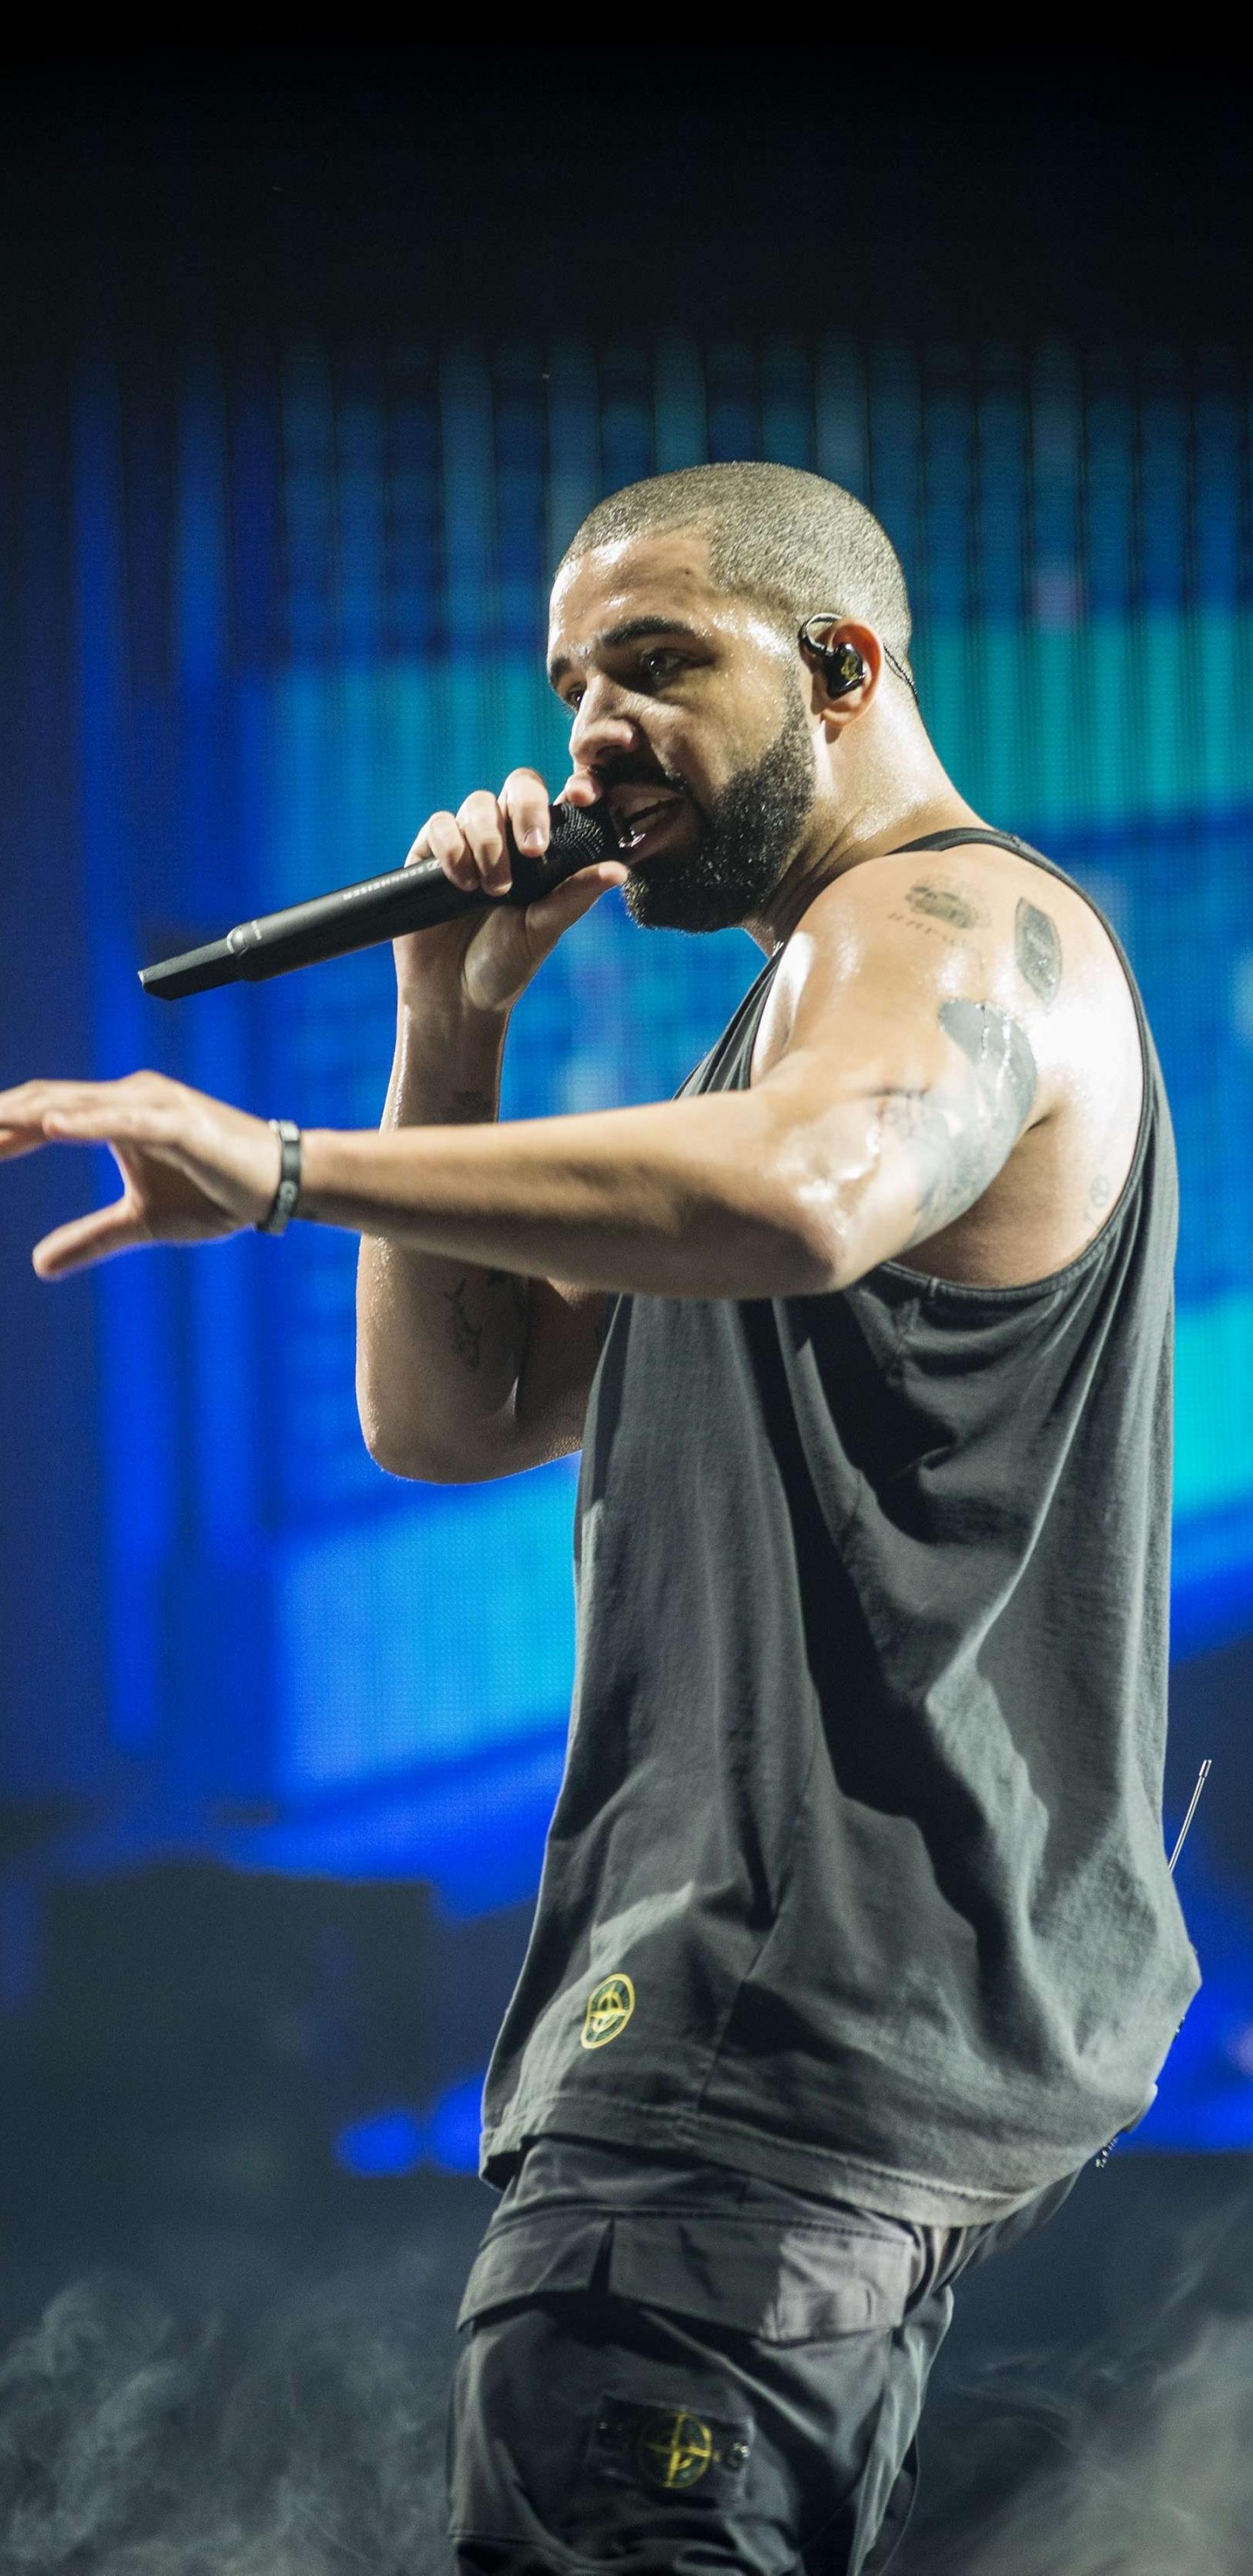 Drake Live, Rapper, Aubrey The Three Migos Tour, More Life, Concert. Wallpaper in 1440x2960 Resolution